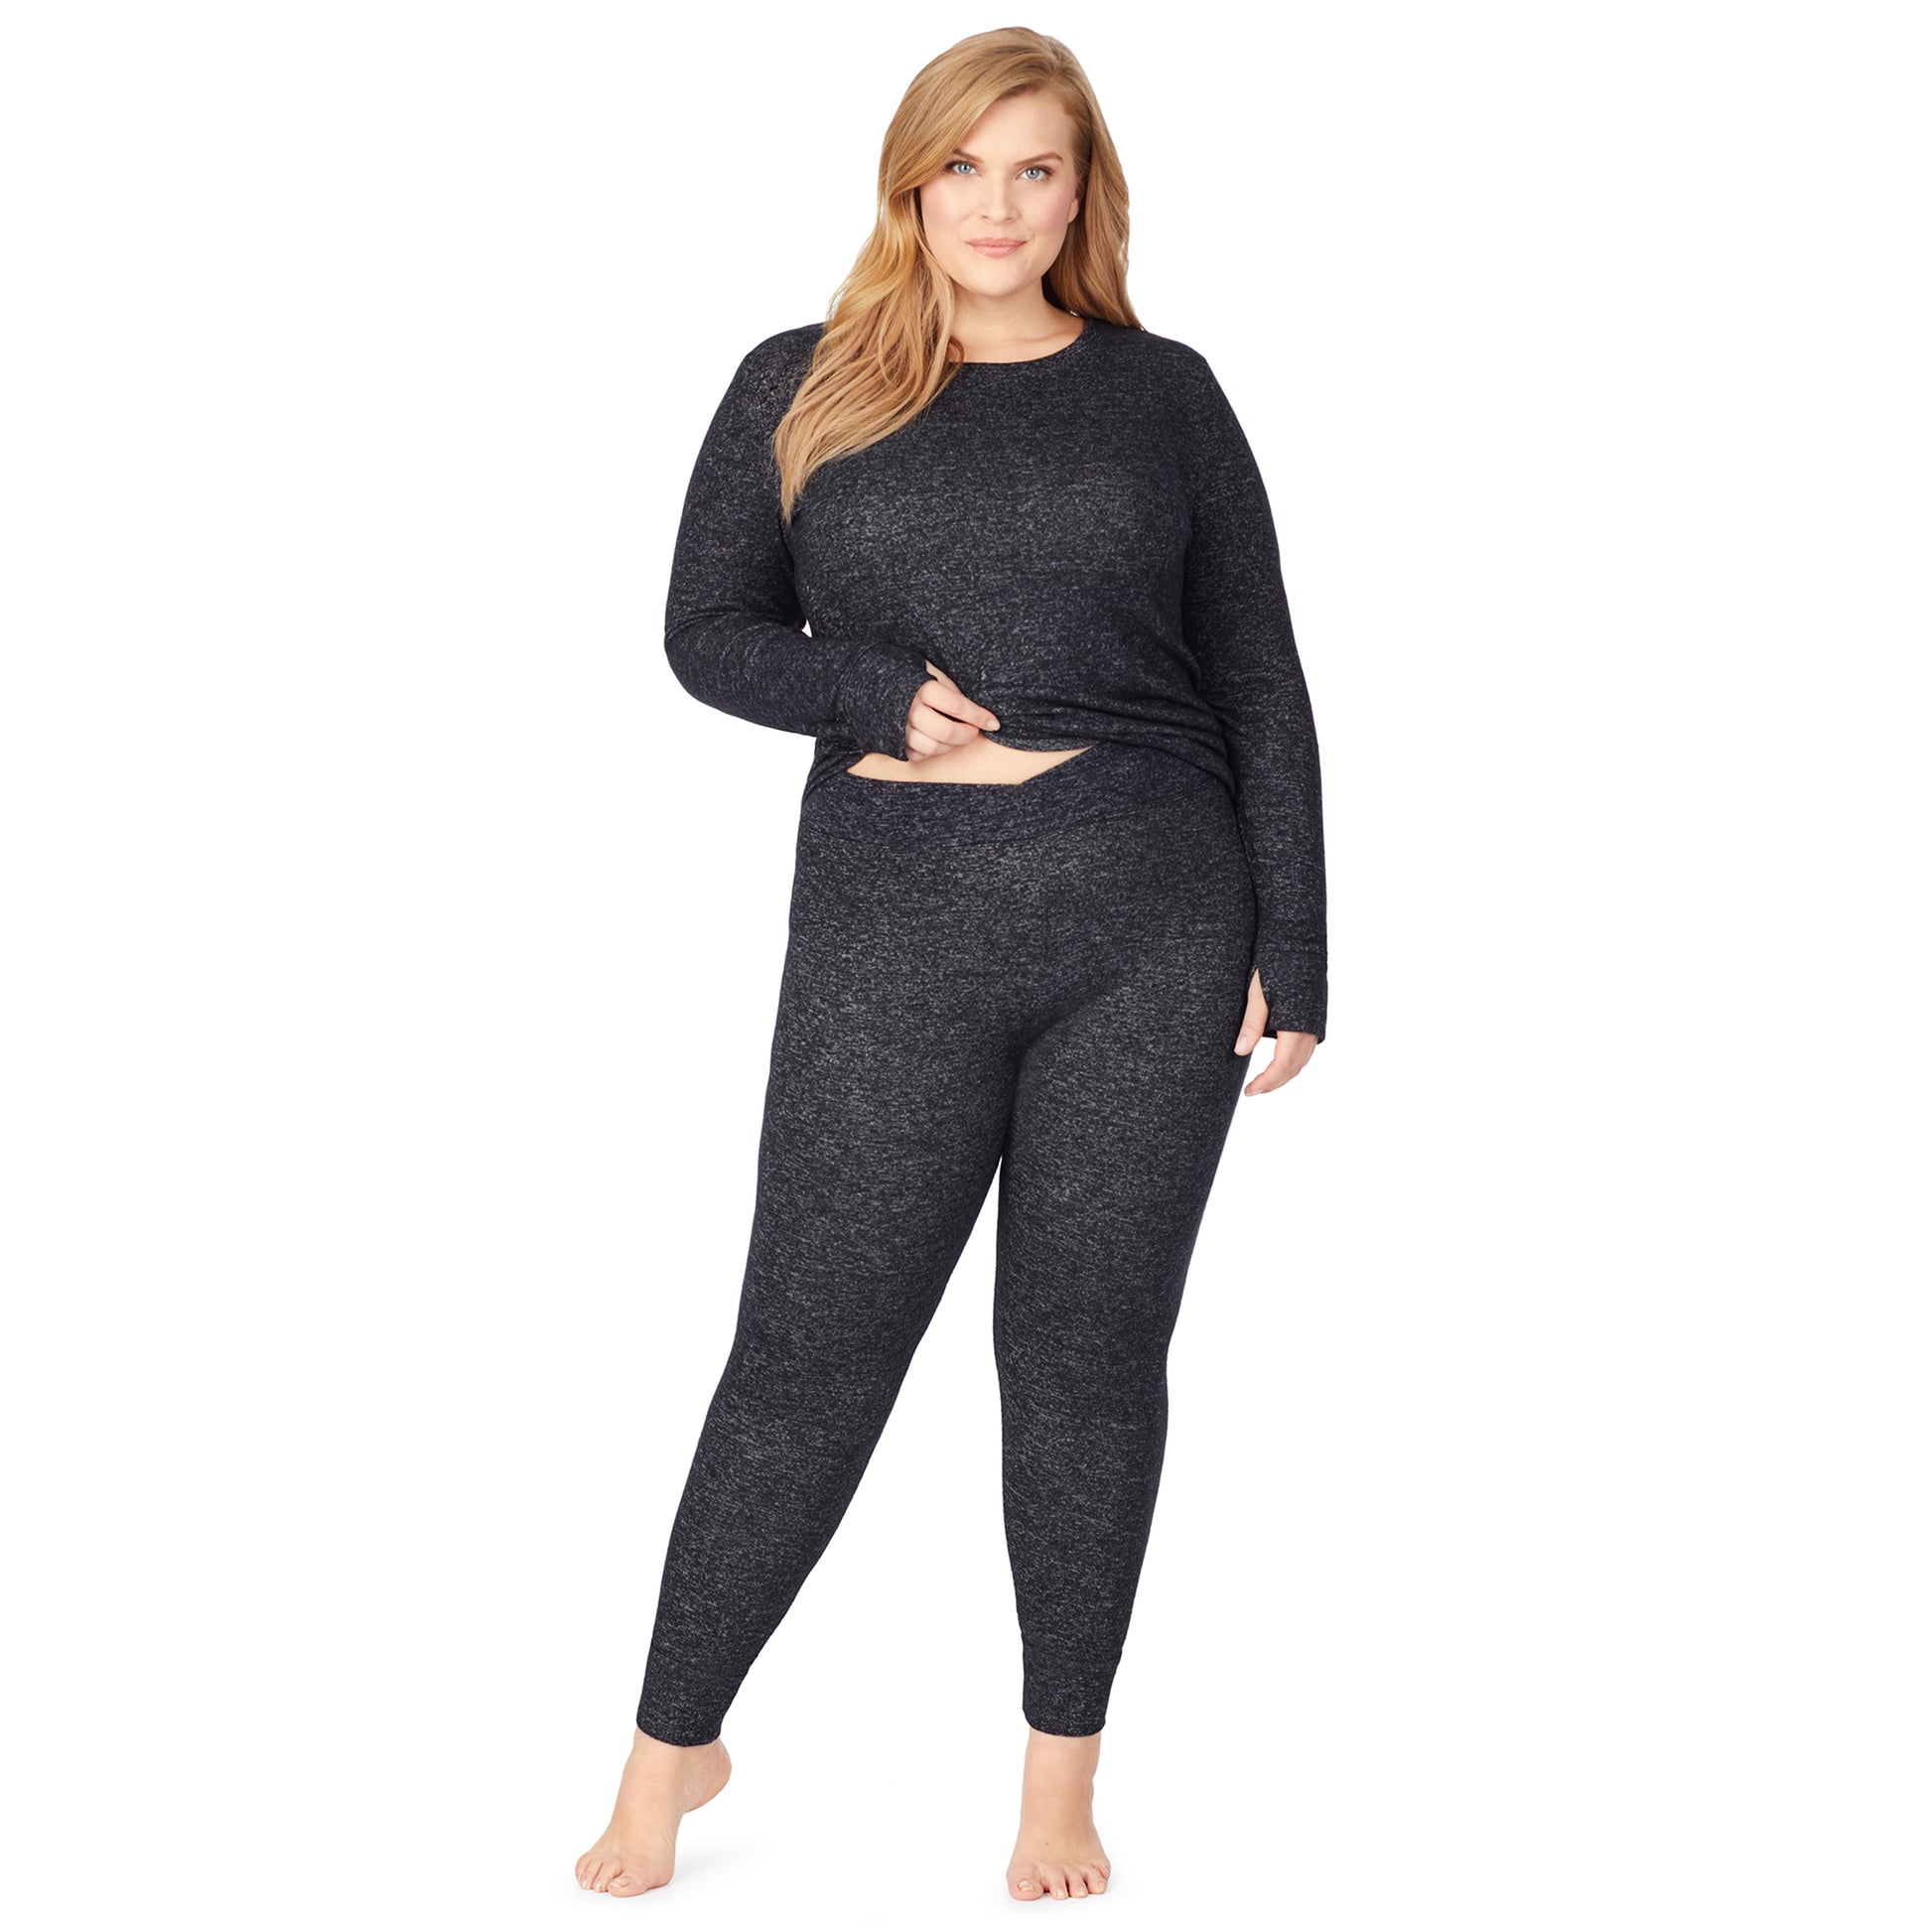 Marled Dark Charcoal; Model is wearing size 1X. She is 5'9", Bust 38", Waist 36", Hips 48.5". @A lady wearing a marled dark charcoal legging plus.